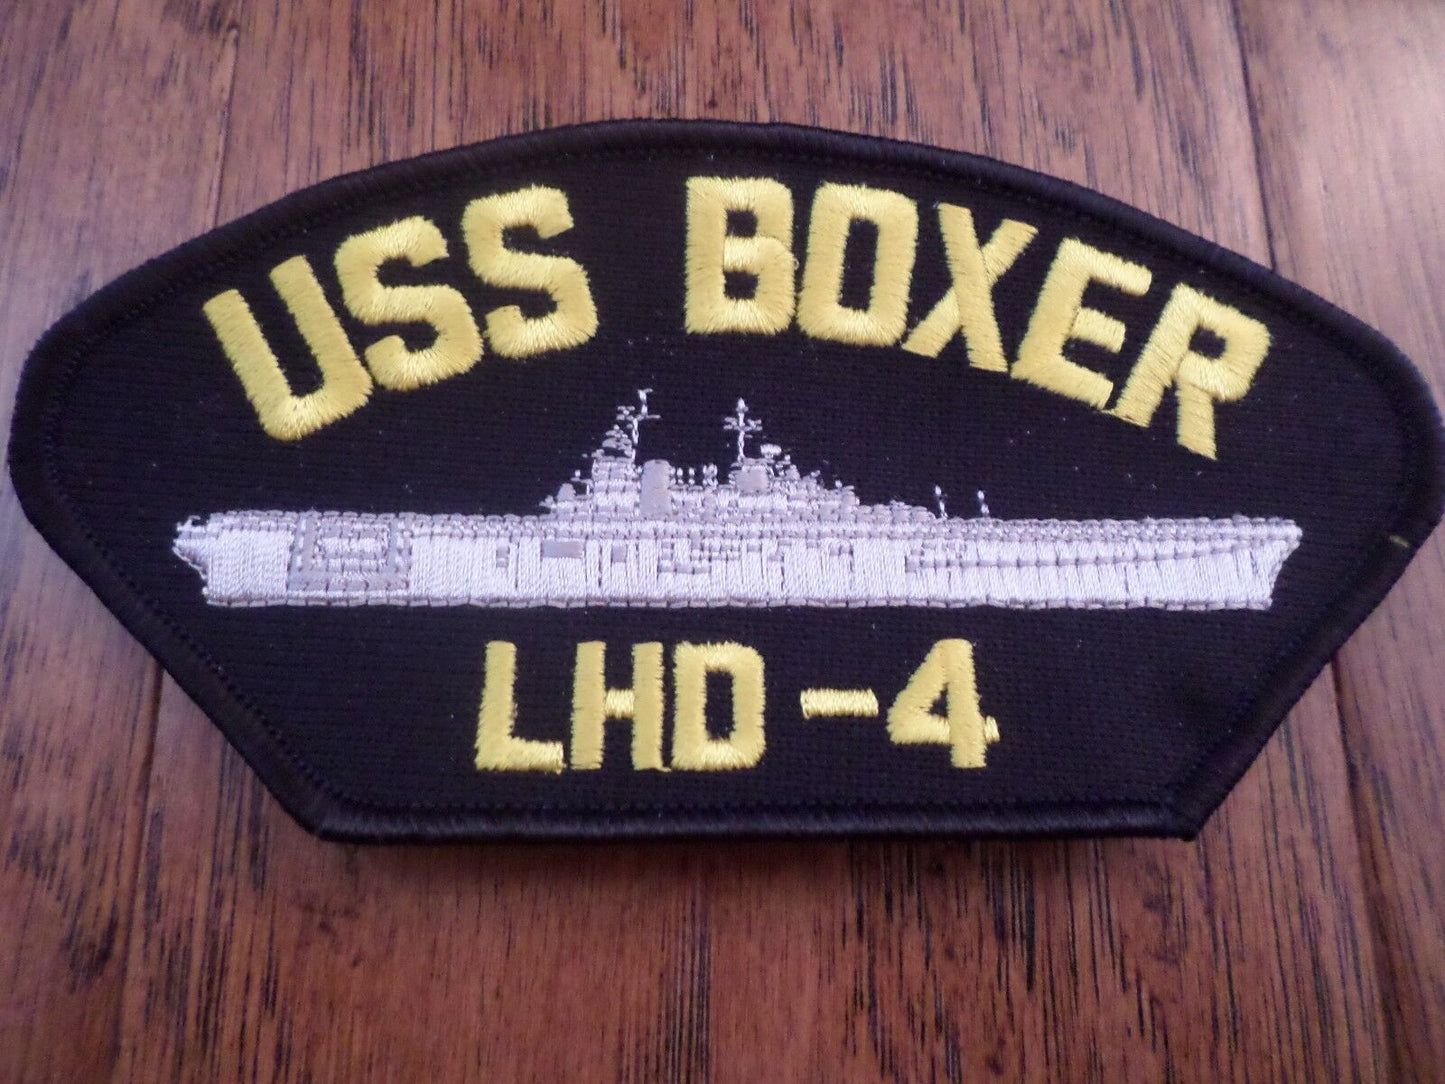 USS BOXER LHD-4 U.S NAVY SHIP HAT PATCH U.S.A MADE EMBROIDERED PATCH